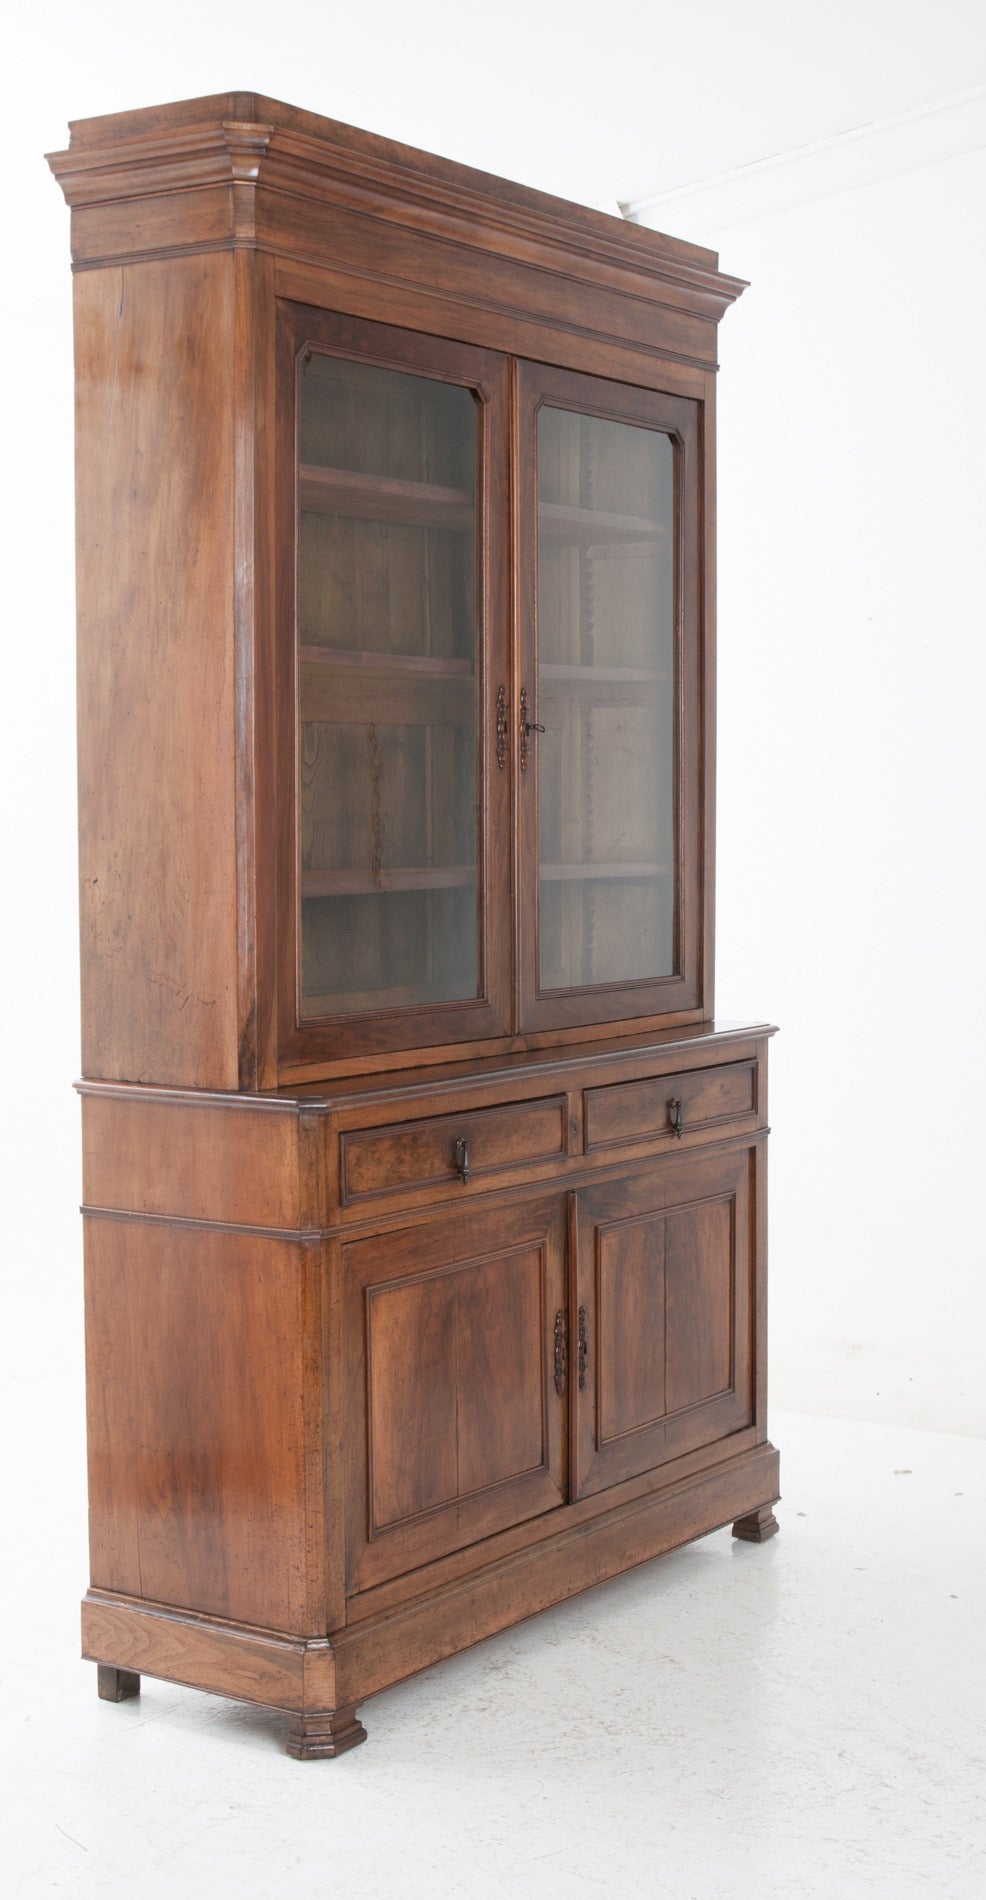 A handsome Louis Philippe mahogany buffet a deux corps with original, oversized, old wavy glass panes in the top, the interior has three adjustable, original finished shelves. This simply carved and designed buffet allows you to enjoy the fine wood